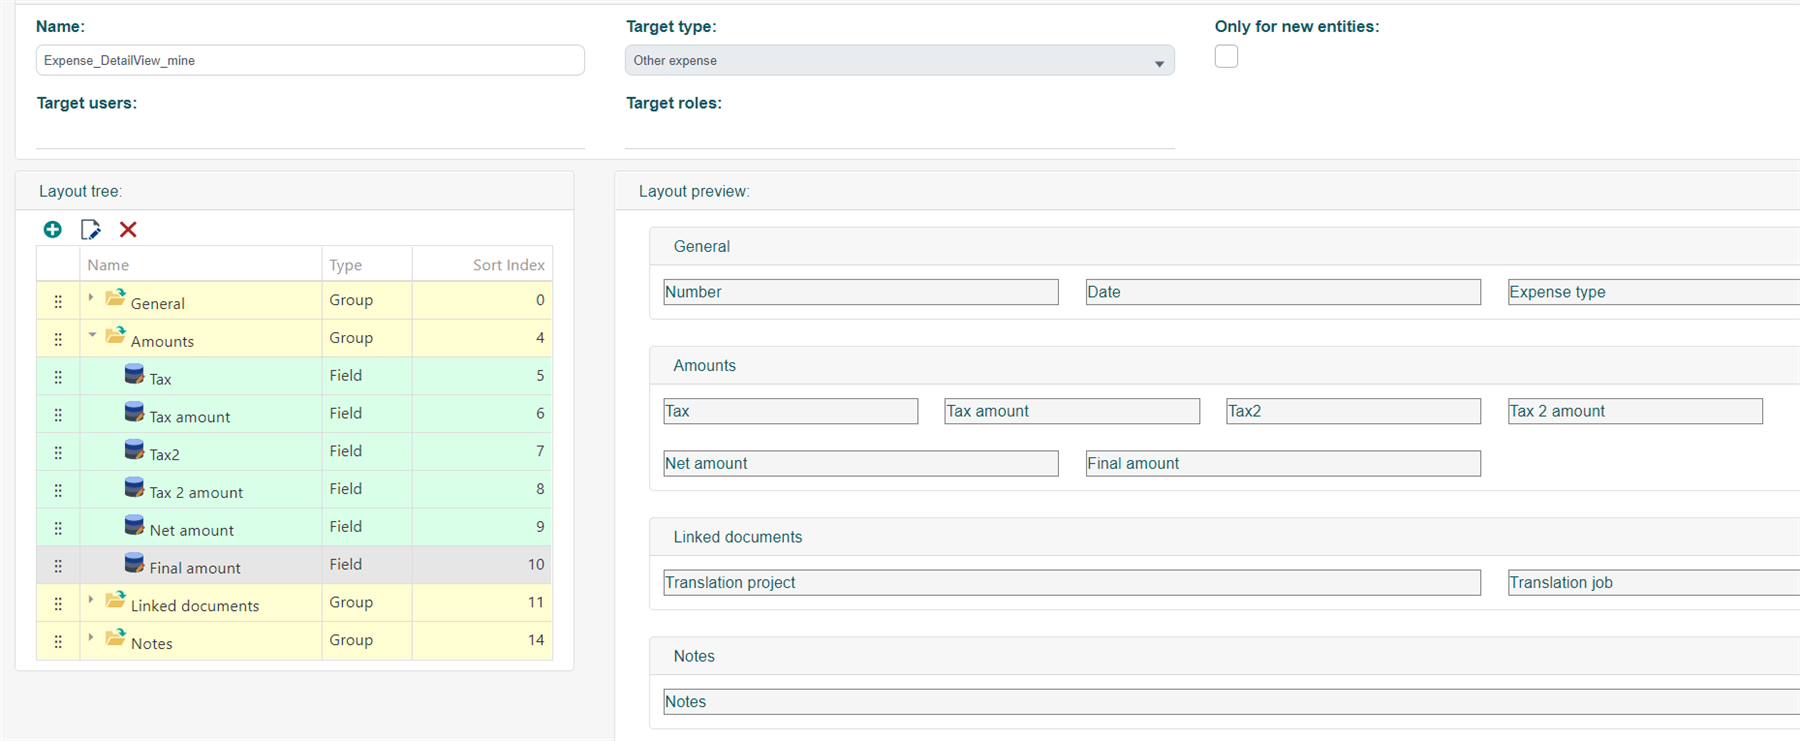 Screenshot of Trados Studio's layout configuration for 'Other expense' showing the fields for 'Tax', 'Tax amount', 'Tax2', 'Tax 2 amount', 'Net amount', and 'Final amount'. No visible errors or warnings are present.